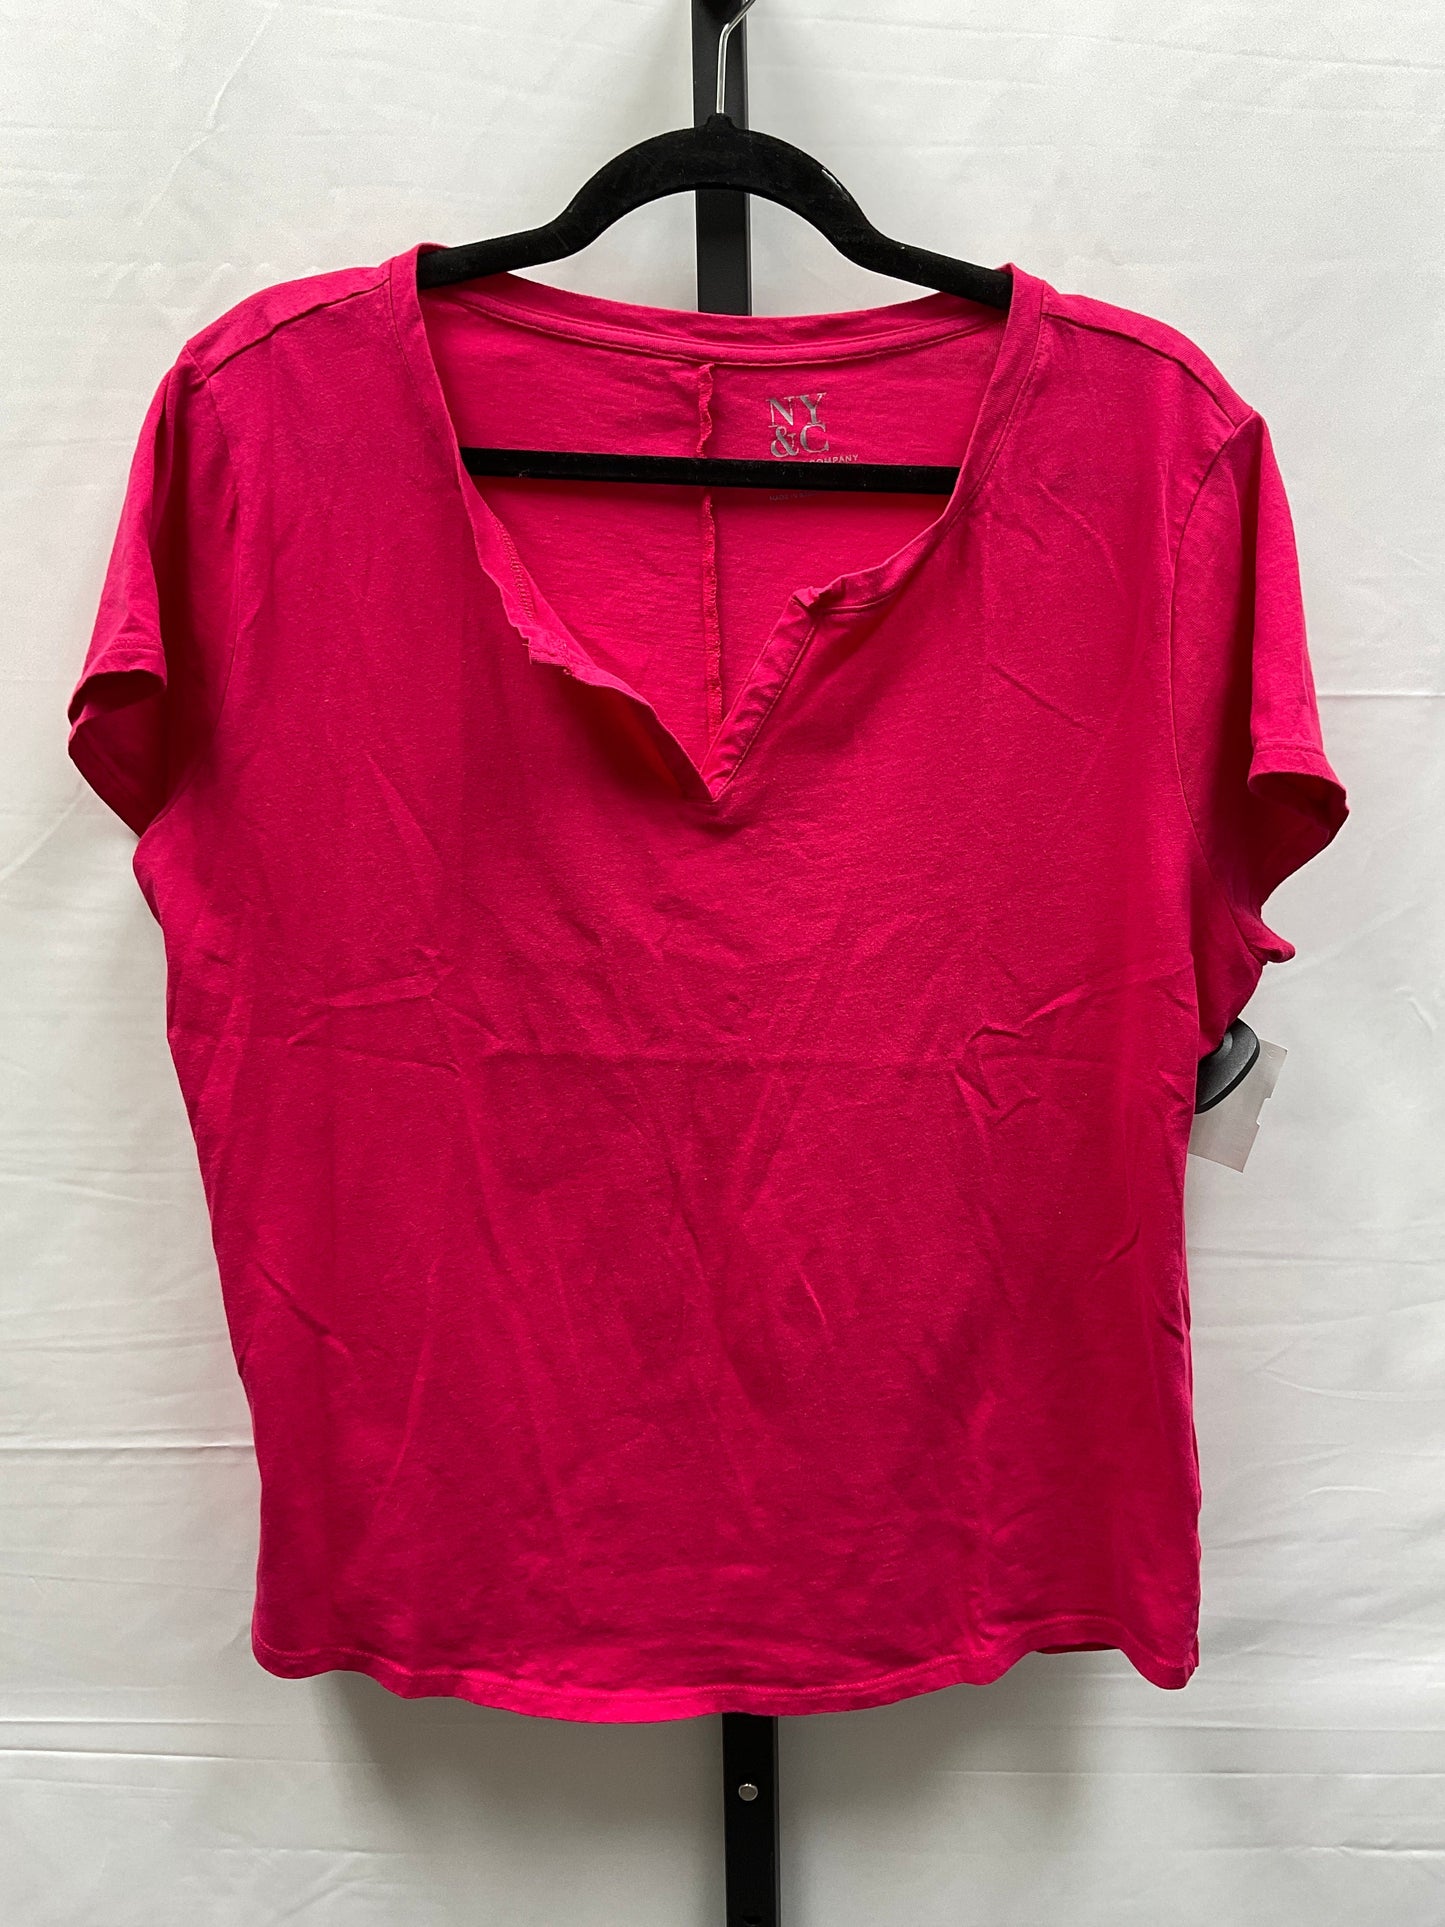 Pink Top Short Sleeve Basic New York And Co, Size Xl